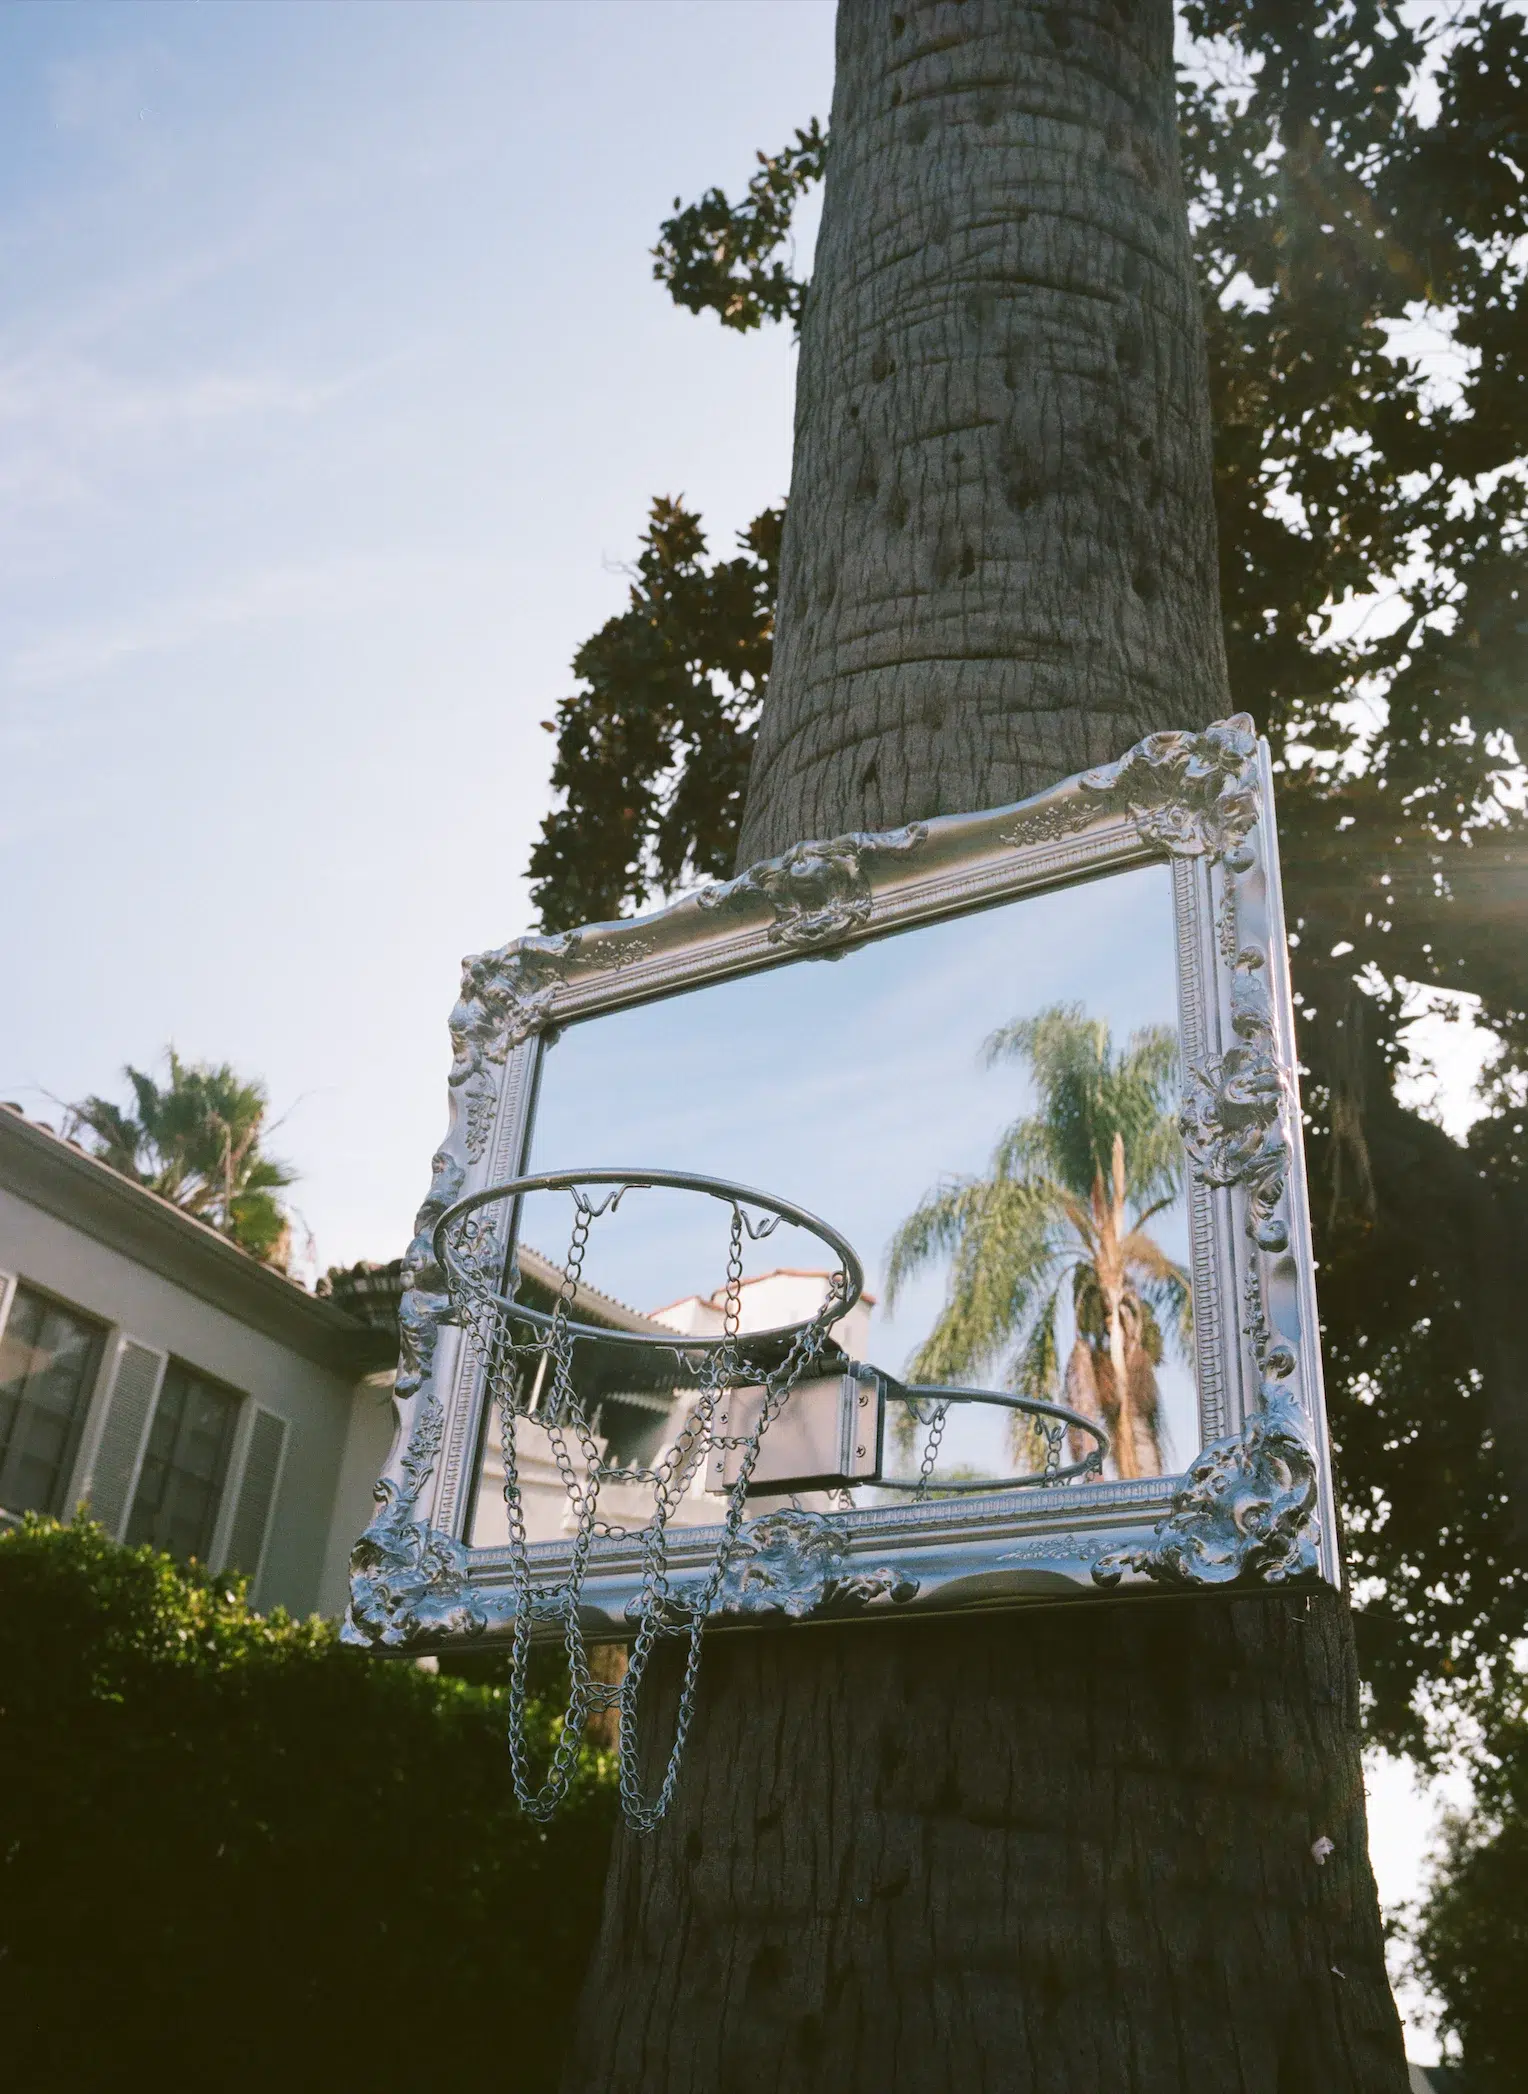 A reflective ornament suspended from a tree near a residence.